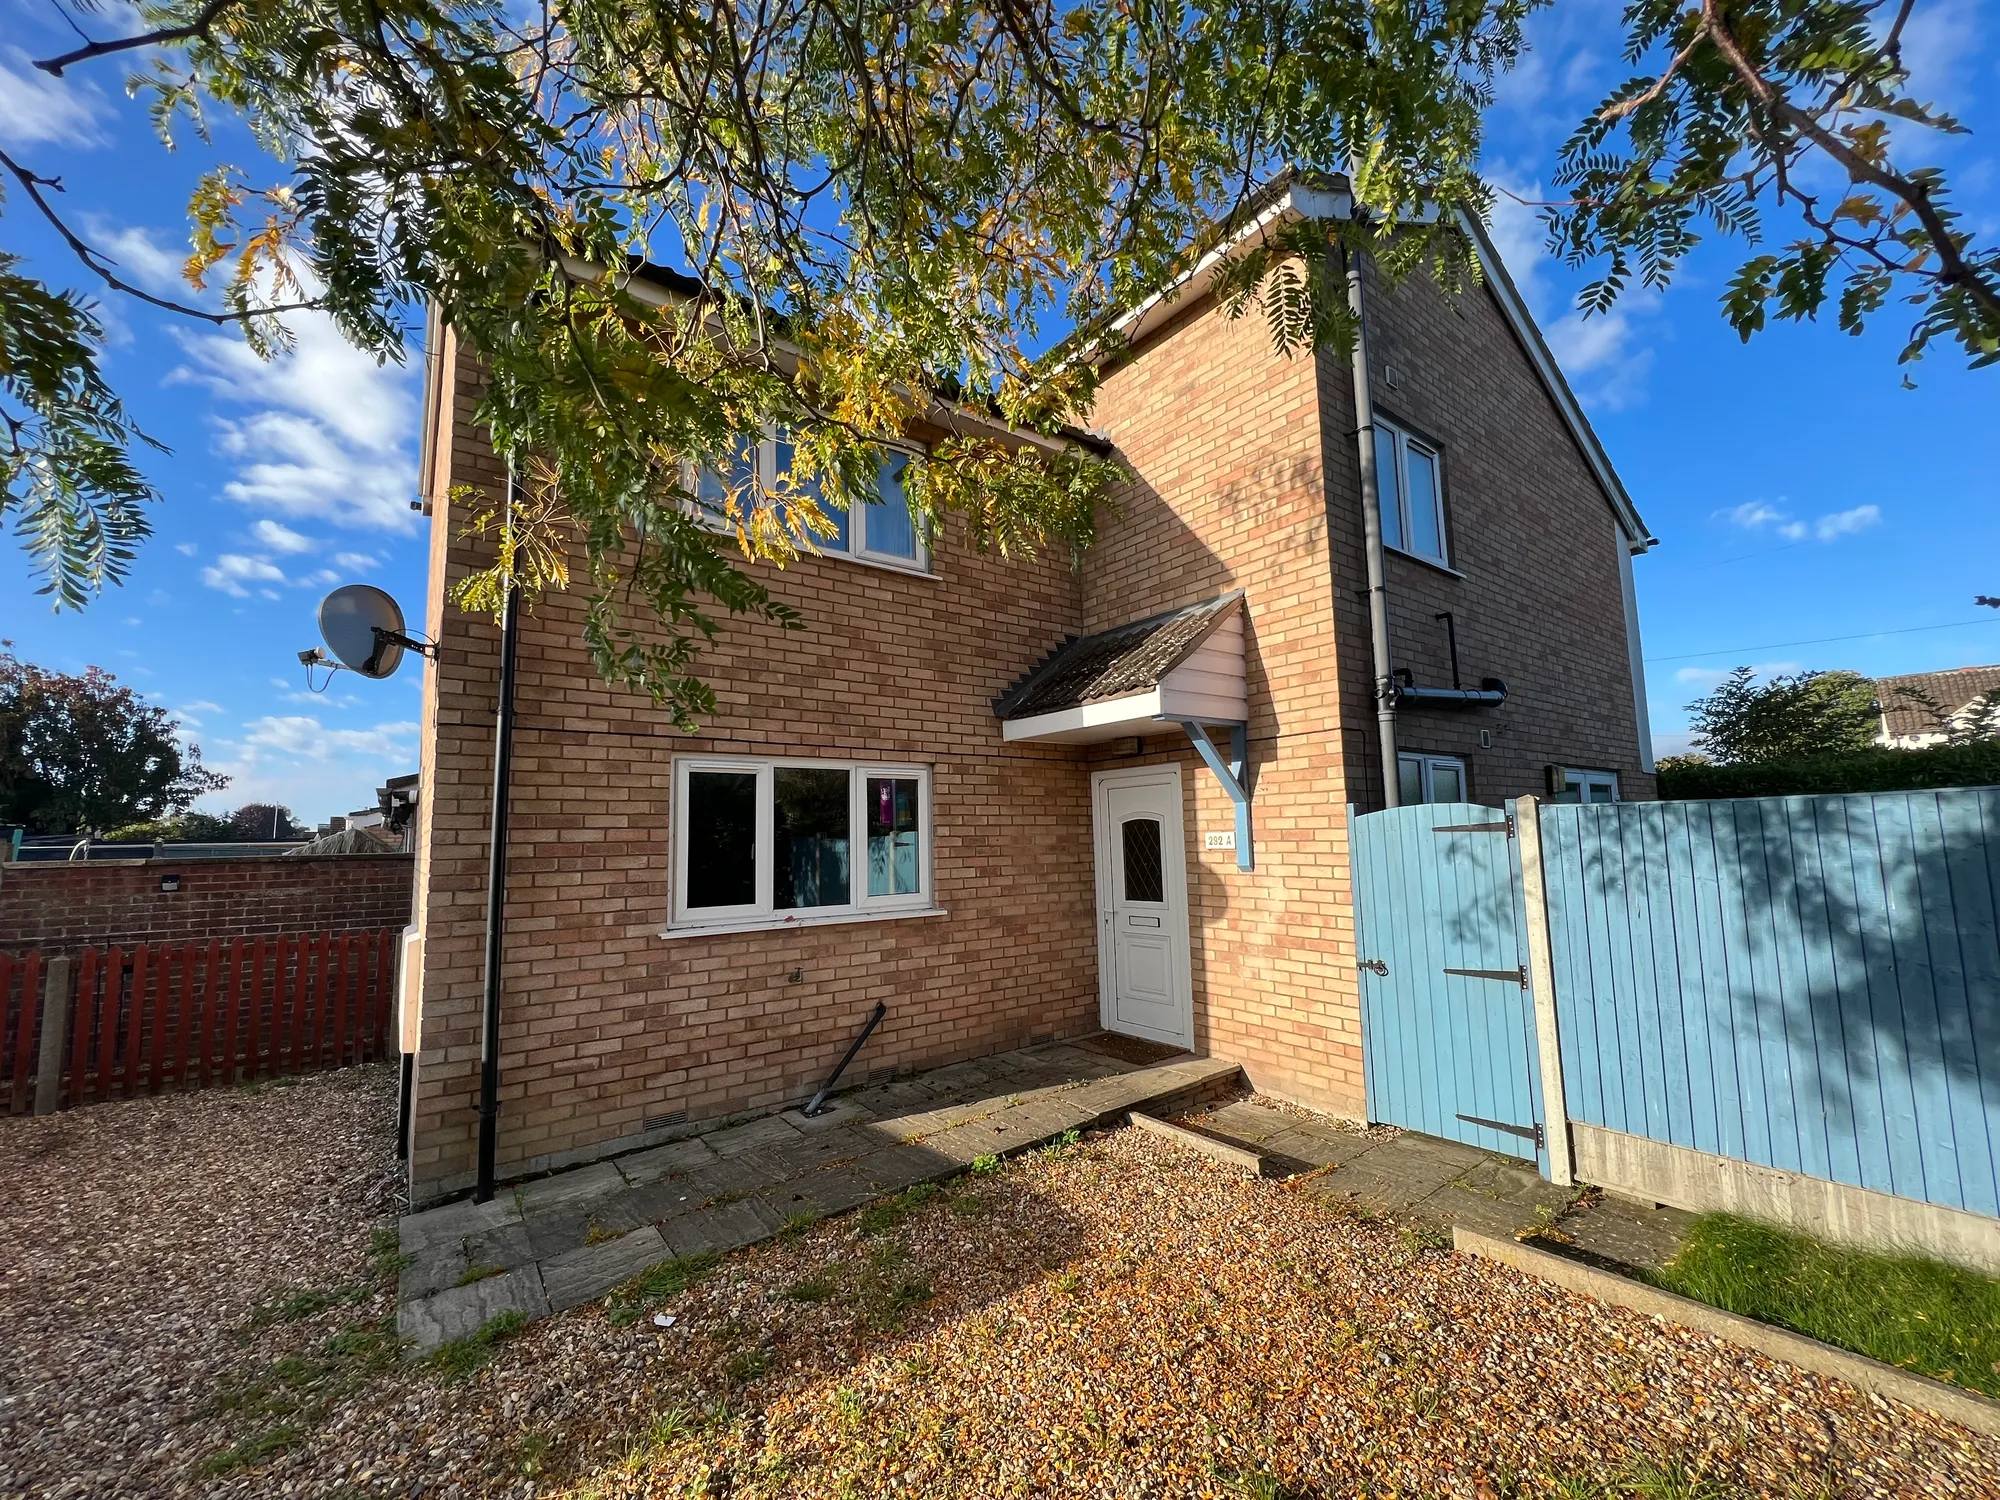 3 bed detached house for sale in Constitution Hill, Norwich  - Property Image 1